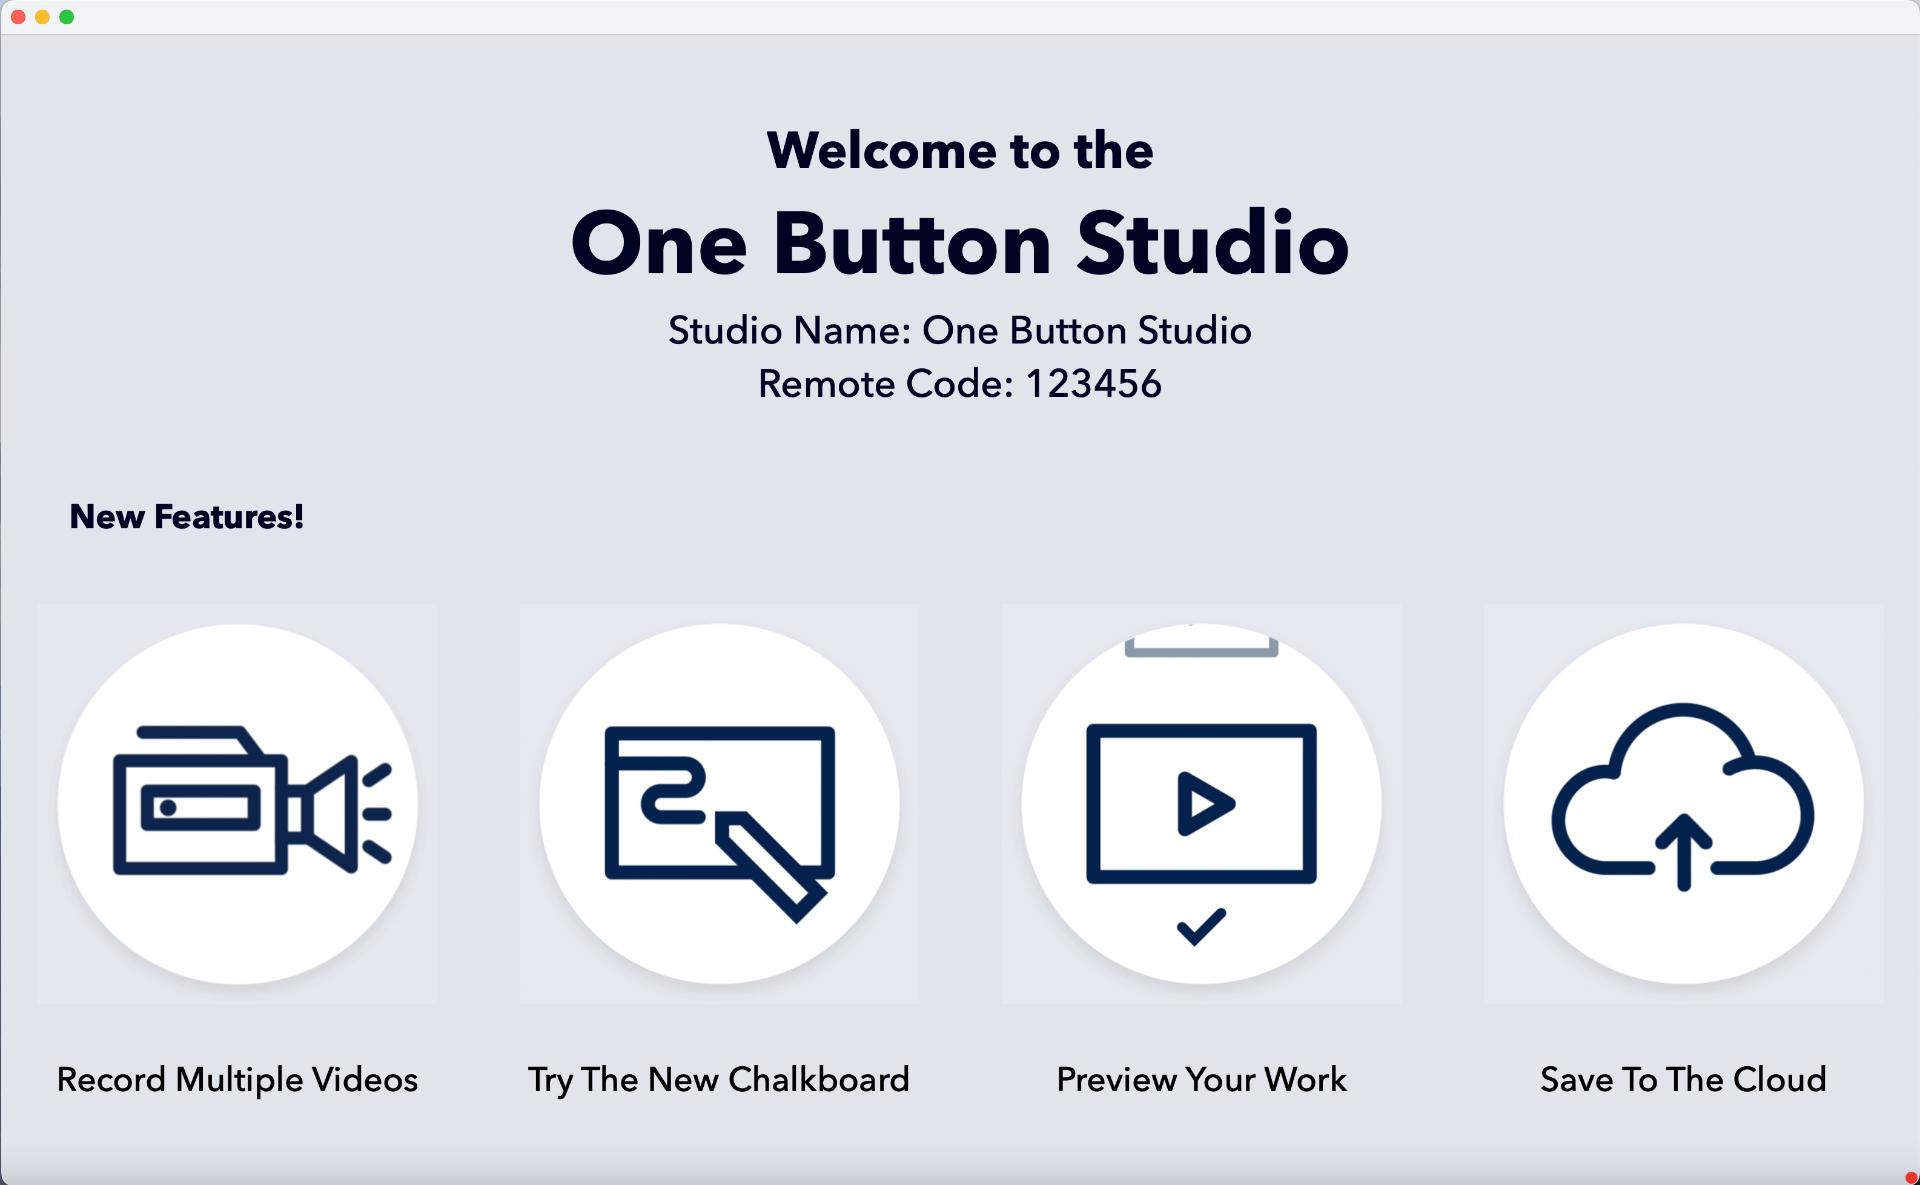 One Button Studio welcome screen